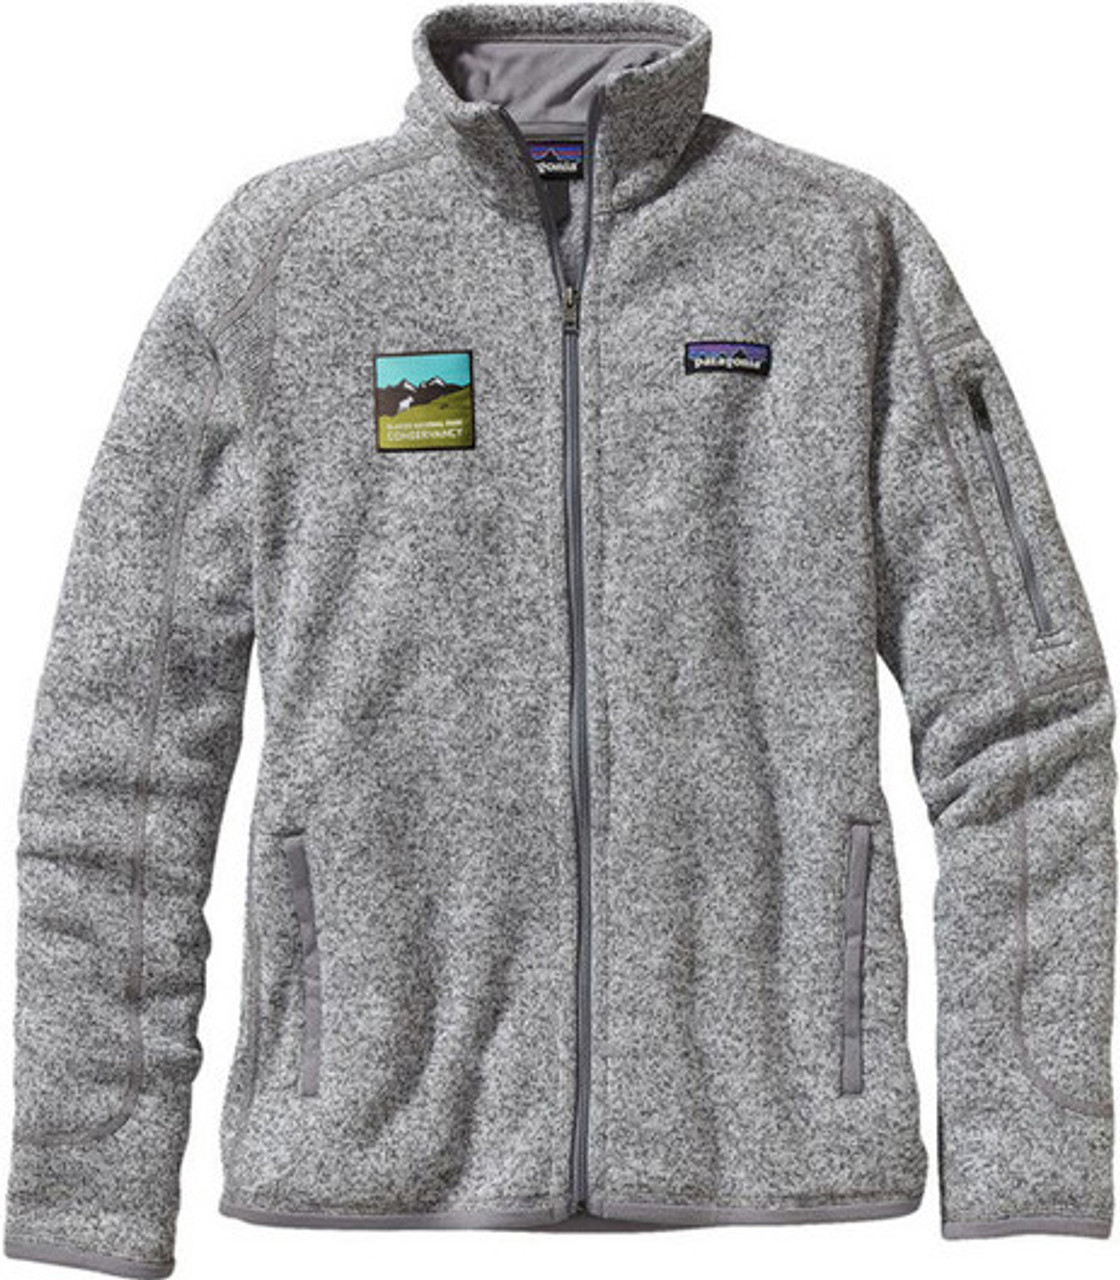 https://cdn11.bigcommerce.com/s-ig5sr43nuo/images/stencil/1280x1280/products/2214/5927/patagonia-better-sweater-birch-womens-glacier-national-park-conservancy__34948.1678481521.jpg?c=2